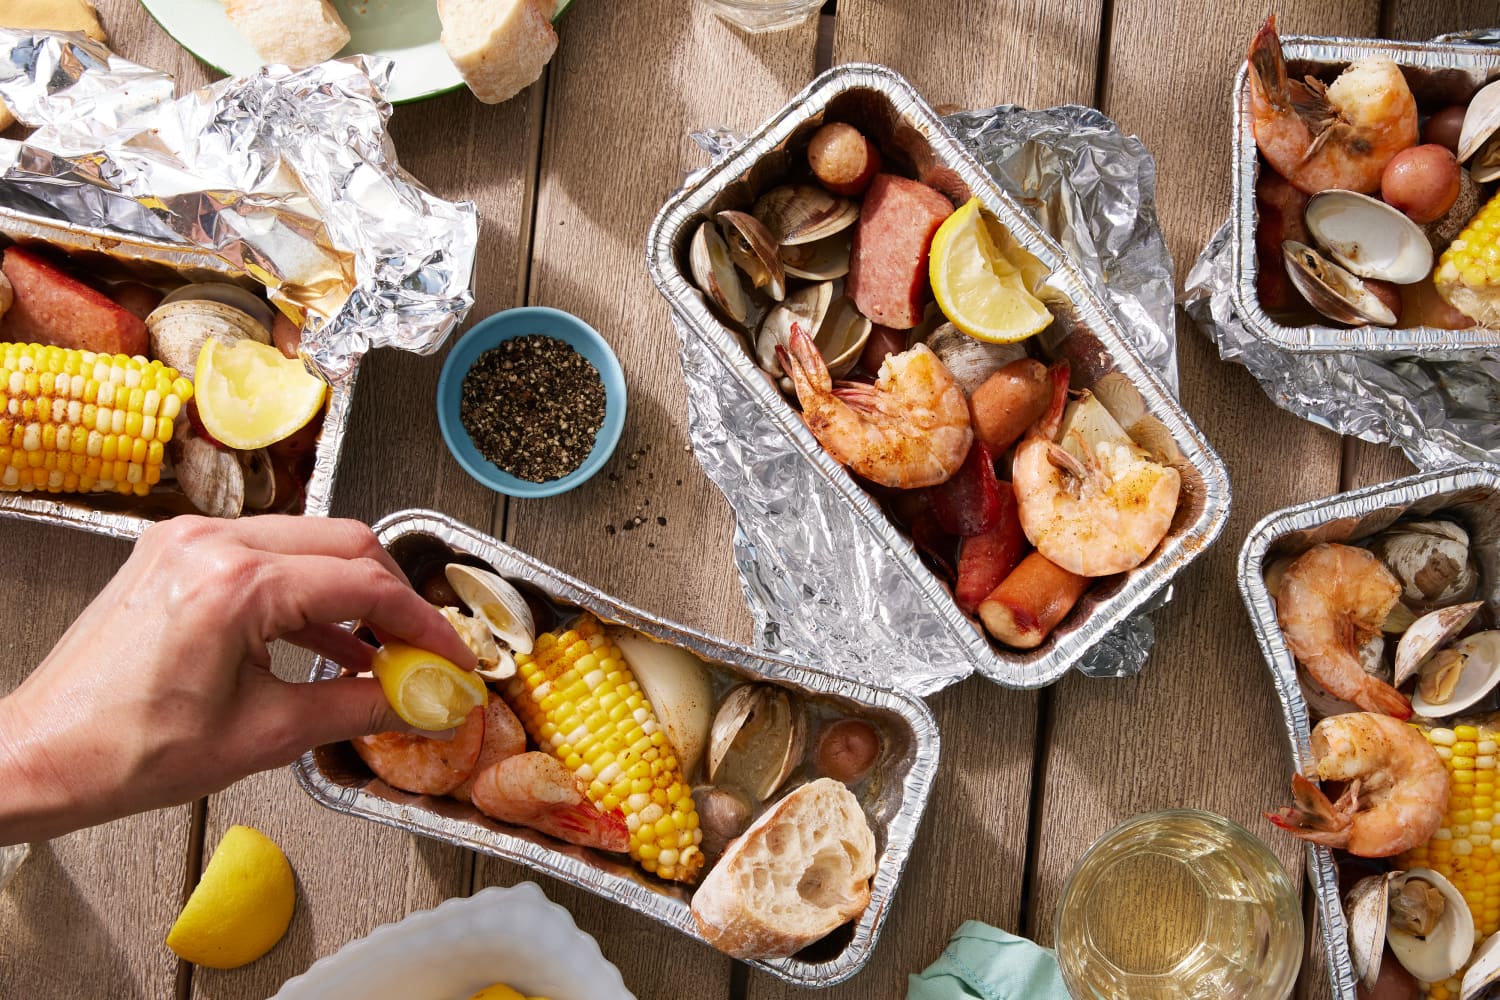 This Brilliant Twist on a Classic Clam Boil Is the Best Dinner I’ll Have All Summer